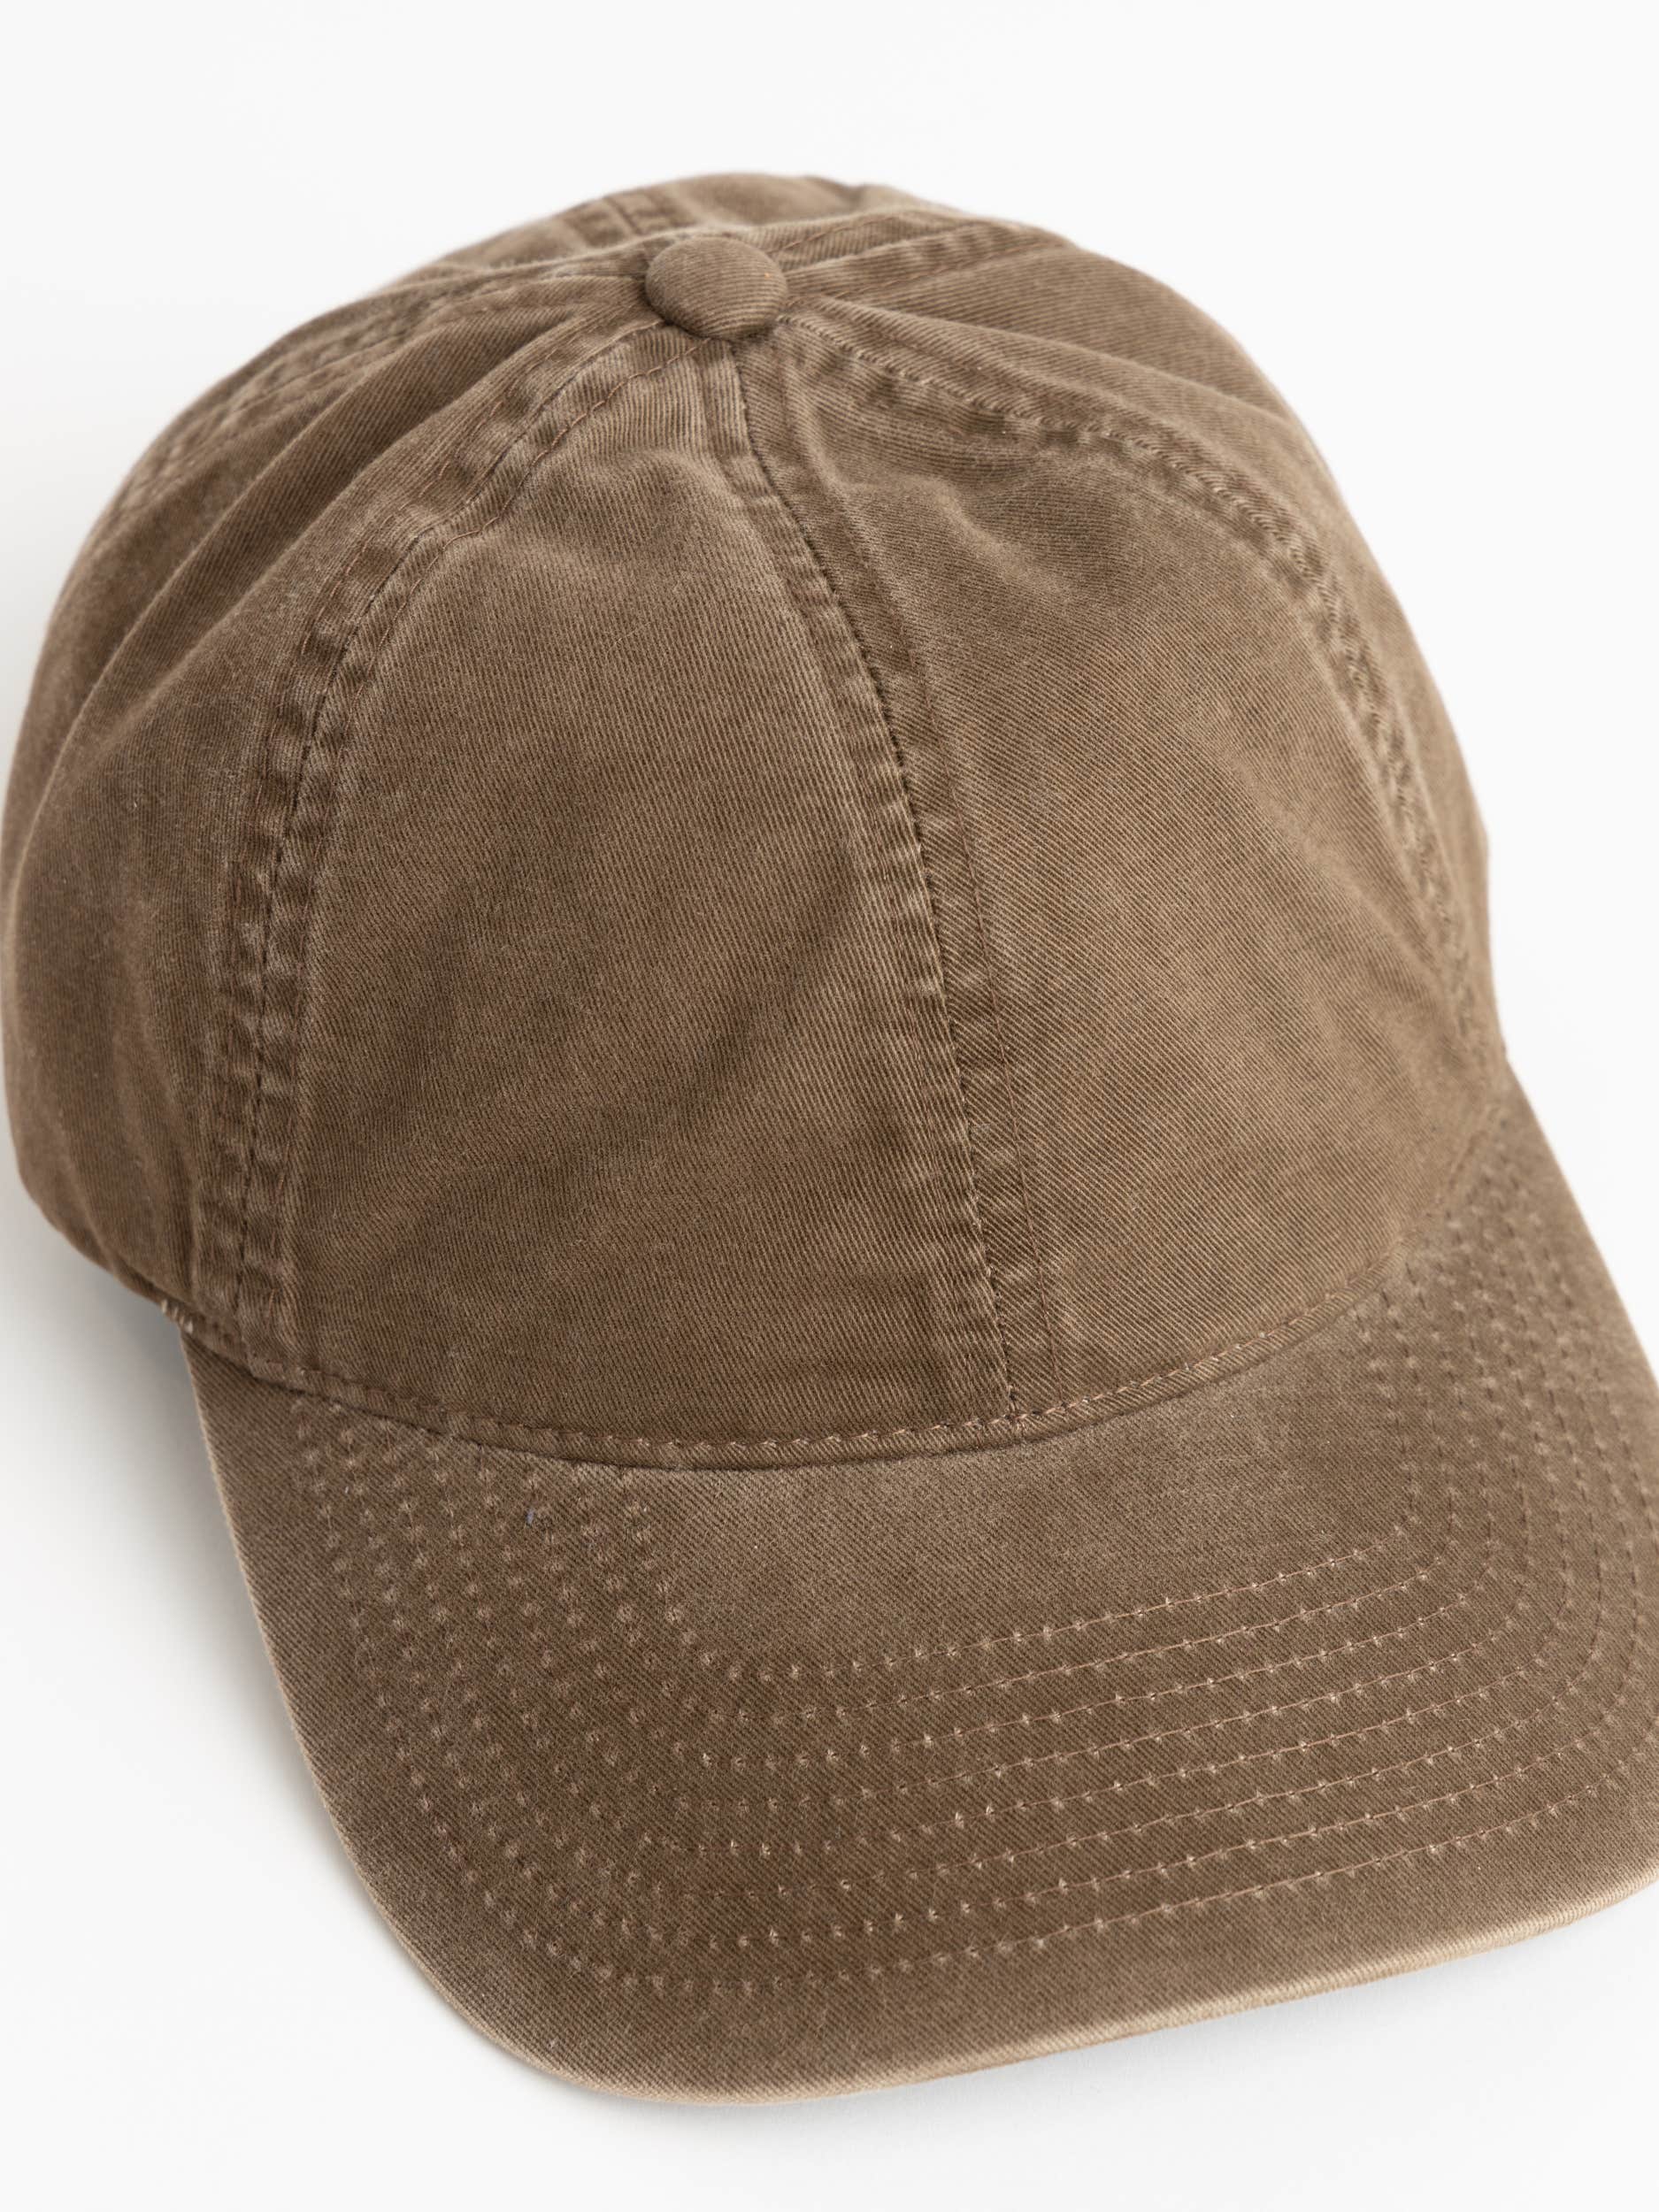 Brown Washed Cotton Ball Cap